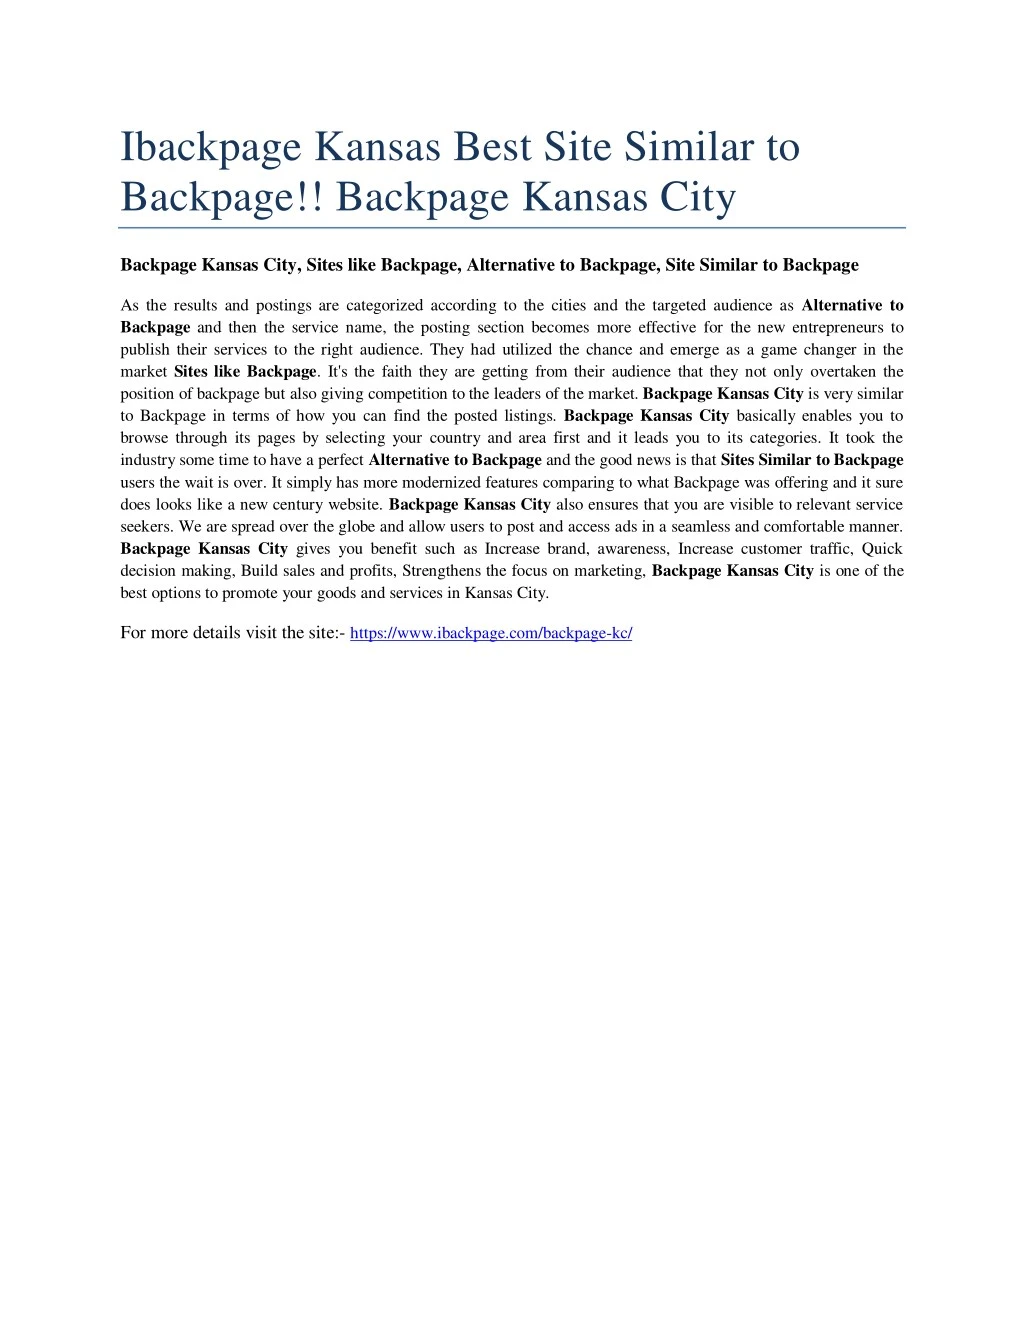 ibackpage kansas best site similar to backpage